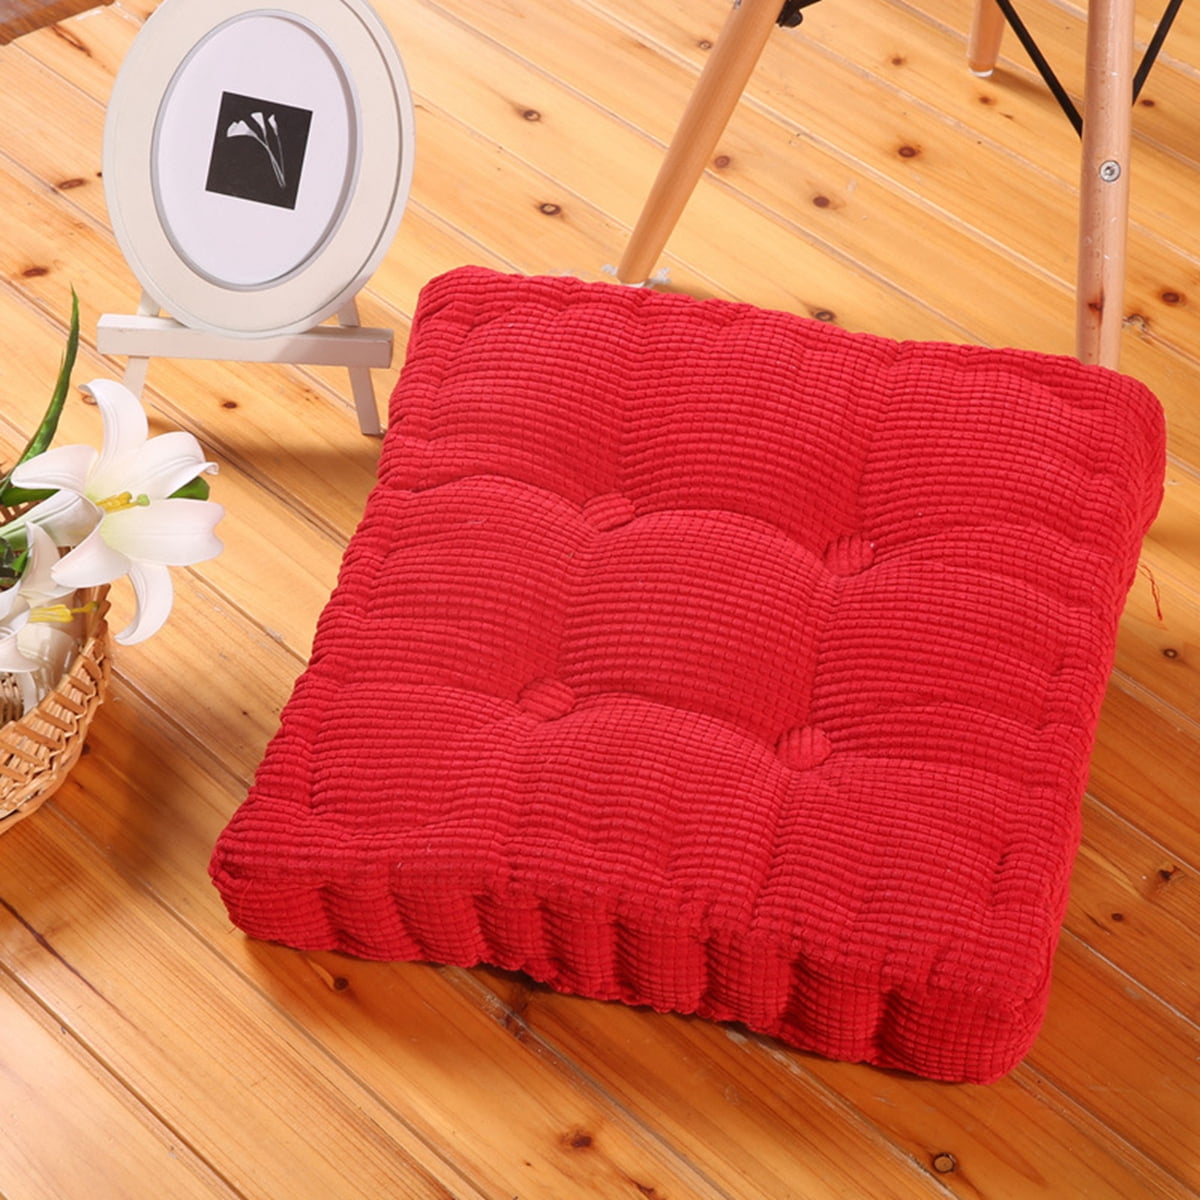 Lascpt Seat Cushion Chair Pads, Super Soft Thick Chair Cushions for Dining  Room, Comfortable Plush Floor Cushions for Patio Sofa Chair Cover, Square